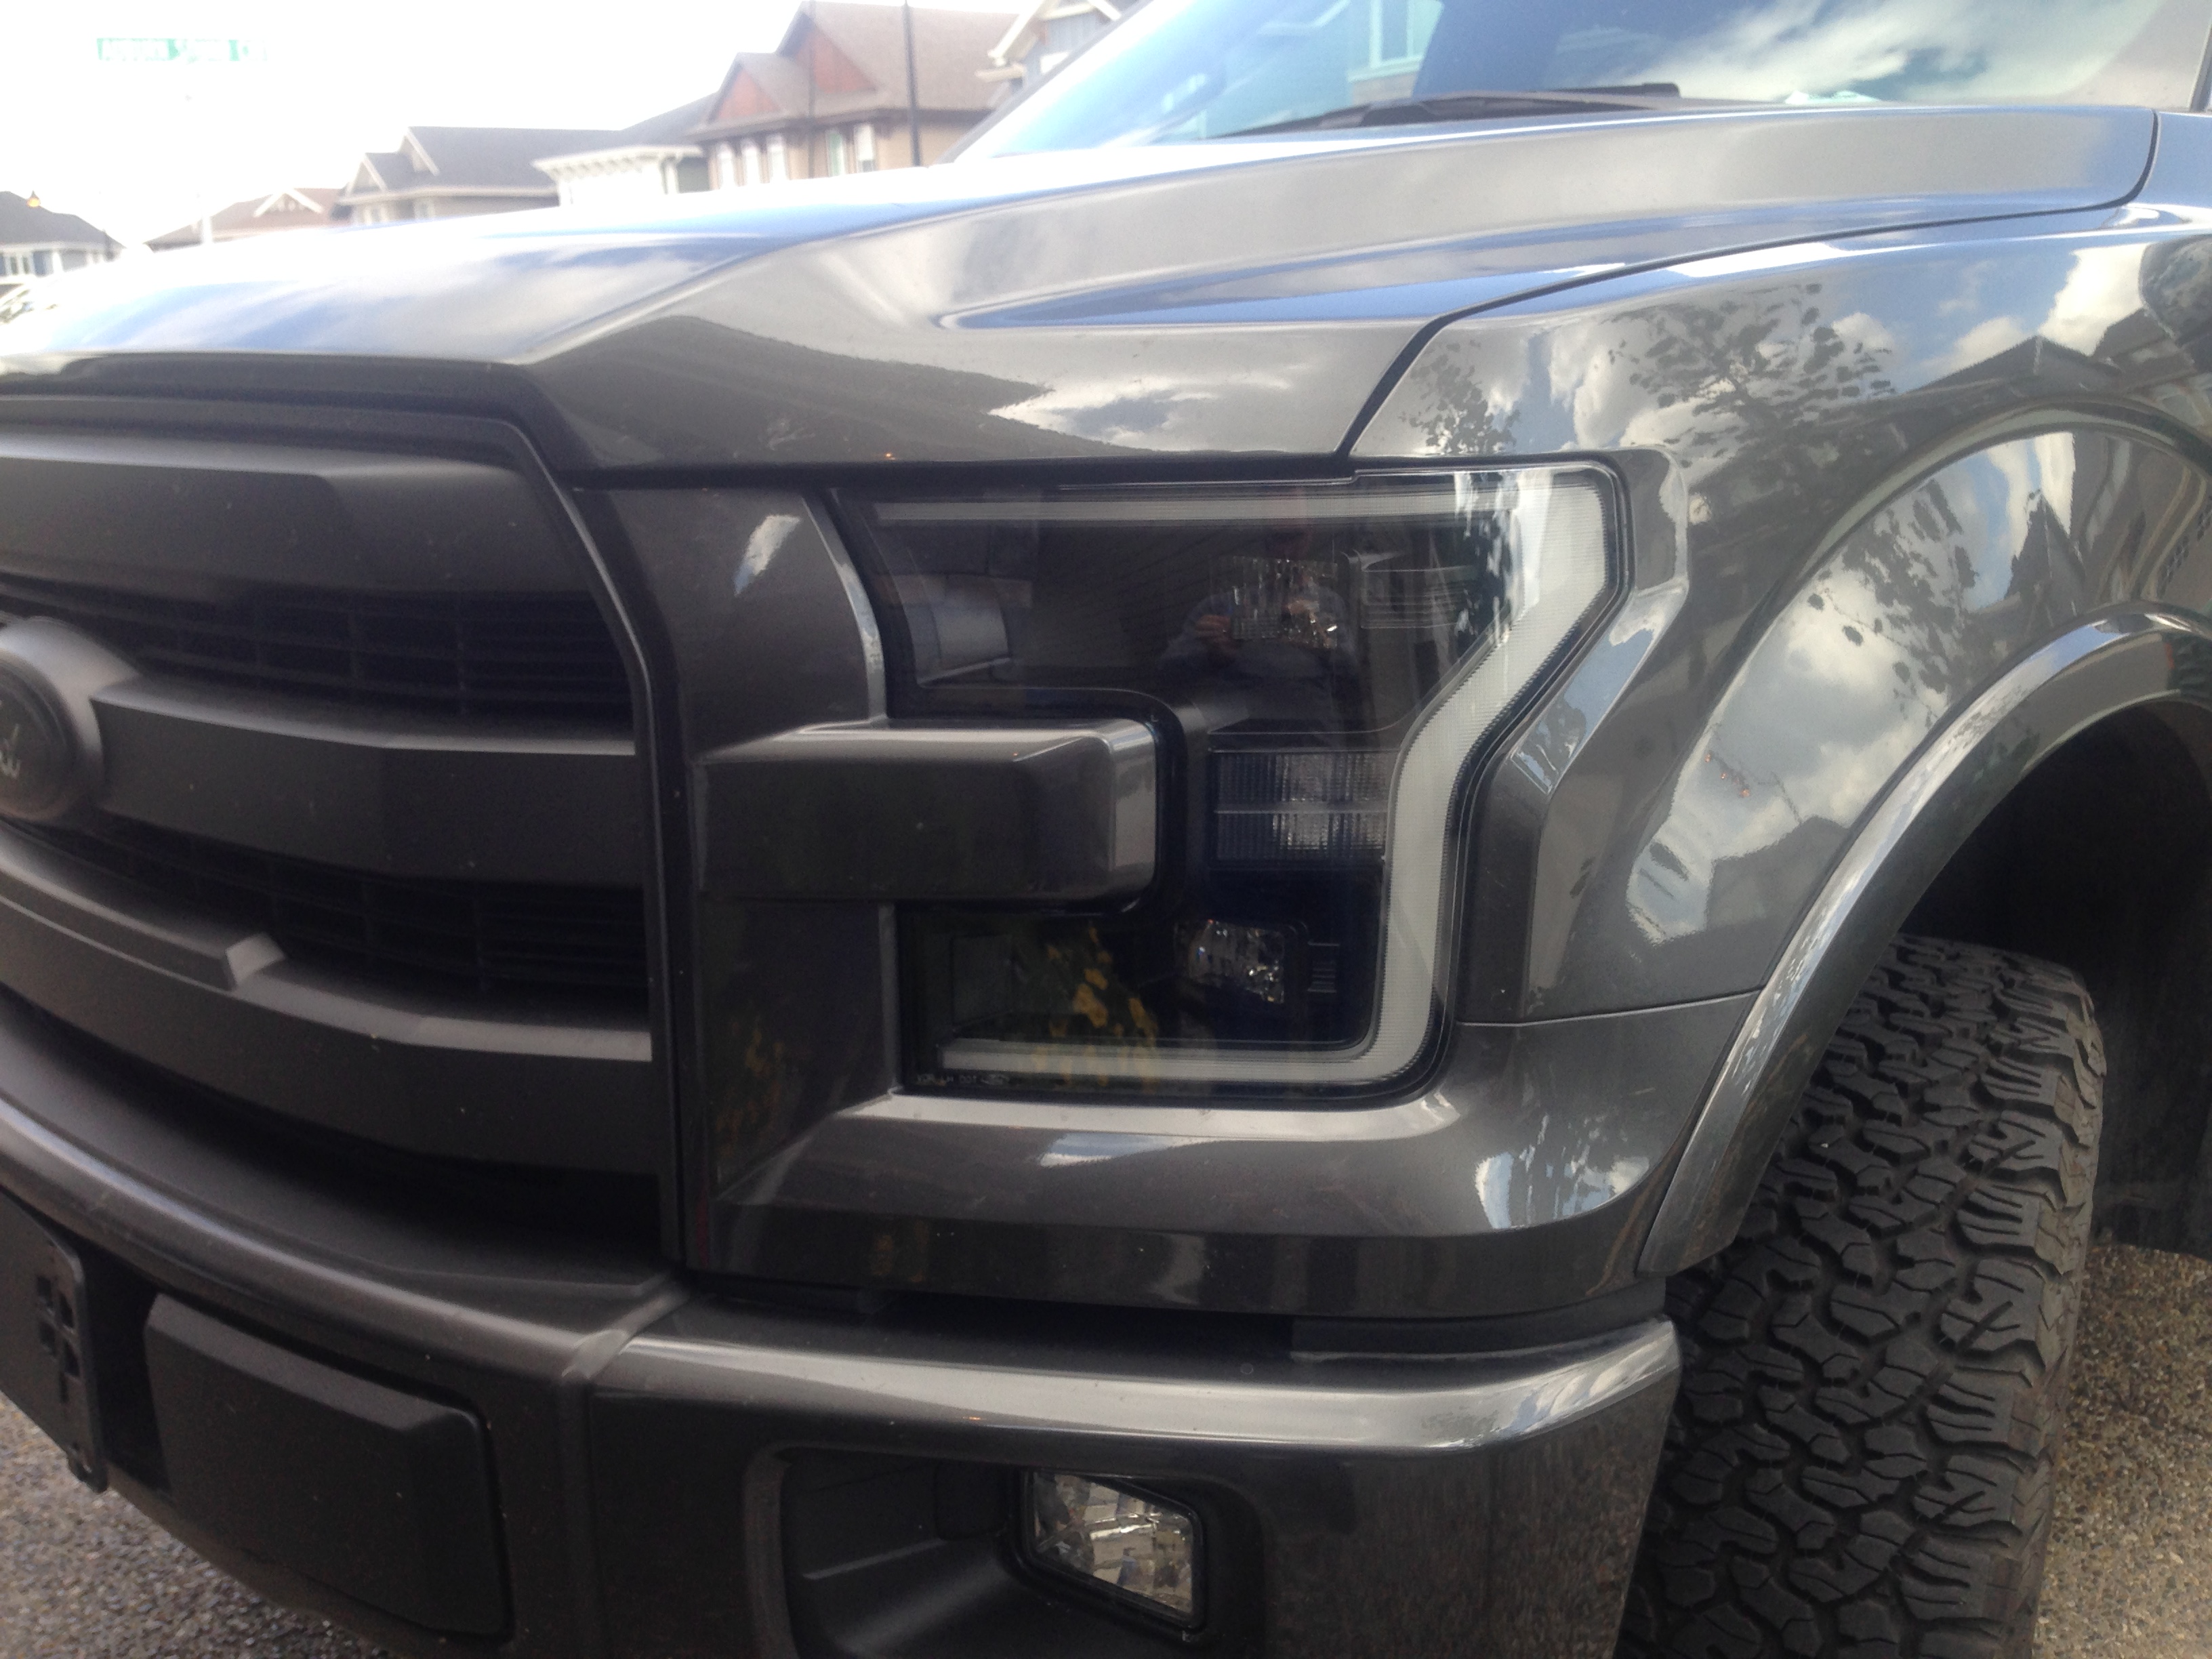 2015 F 150 Halogen To Oem Led Headlight Conversion From Raptor